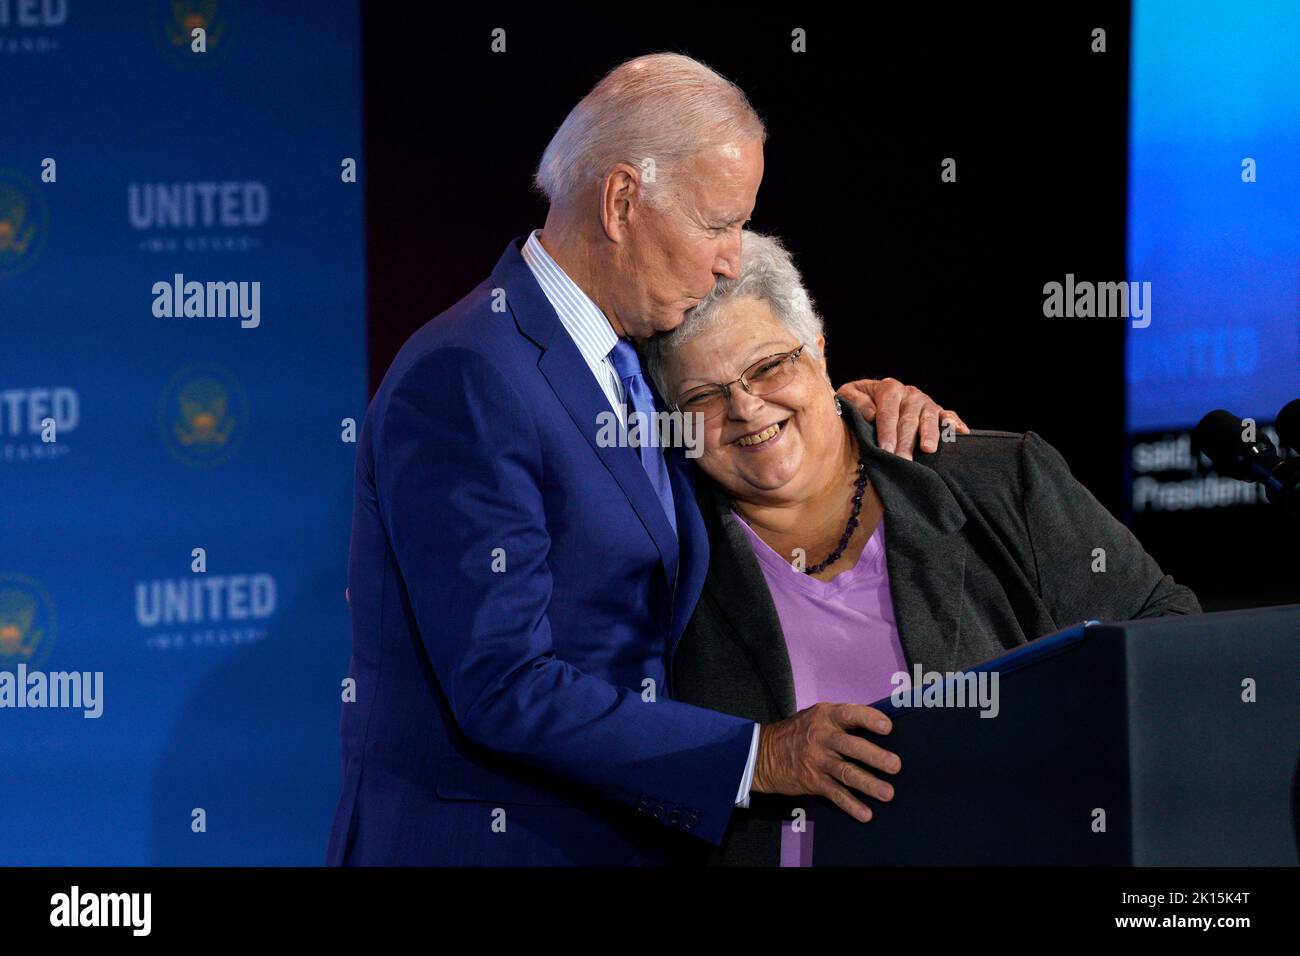 U.S. President Joe Biden kisses Susan Bro, mother of Heather Heyer was killed at the Unite the Right rally in Charlottesville, at the United We Stand Summit in the East Room at the White House in Washington on September 15, 2022. Photo by Yuri Gripas/ABACAPRESS.COM Stock Photo